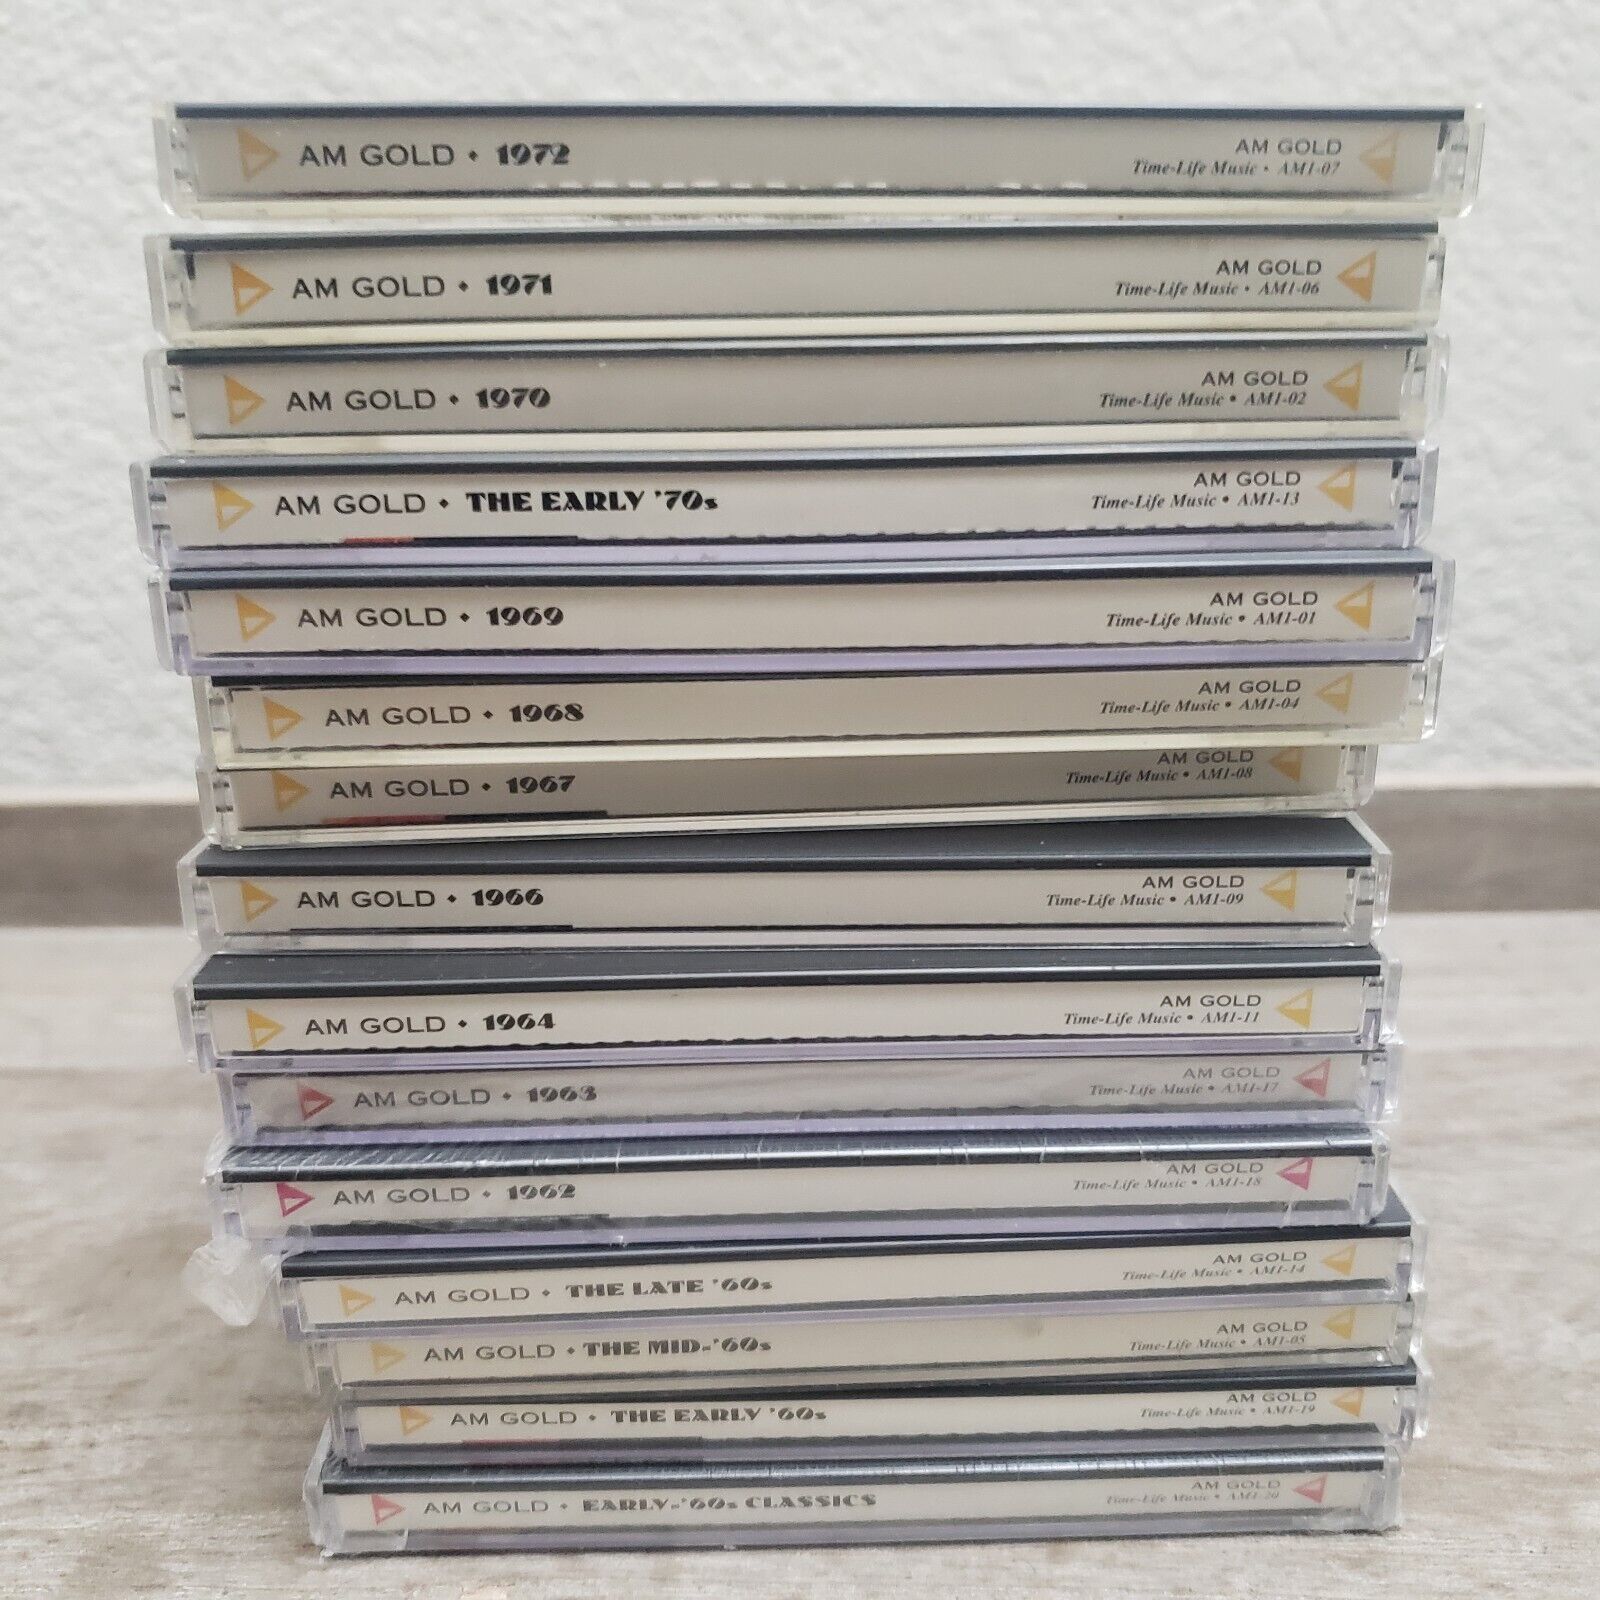 AM GOLD Time Life CD Lot 15 Discs 60s & 70s Radio Hits Collection Compilation